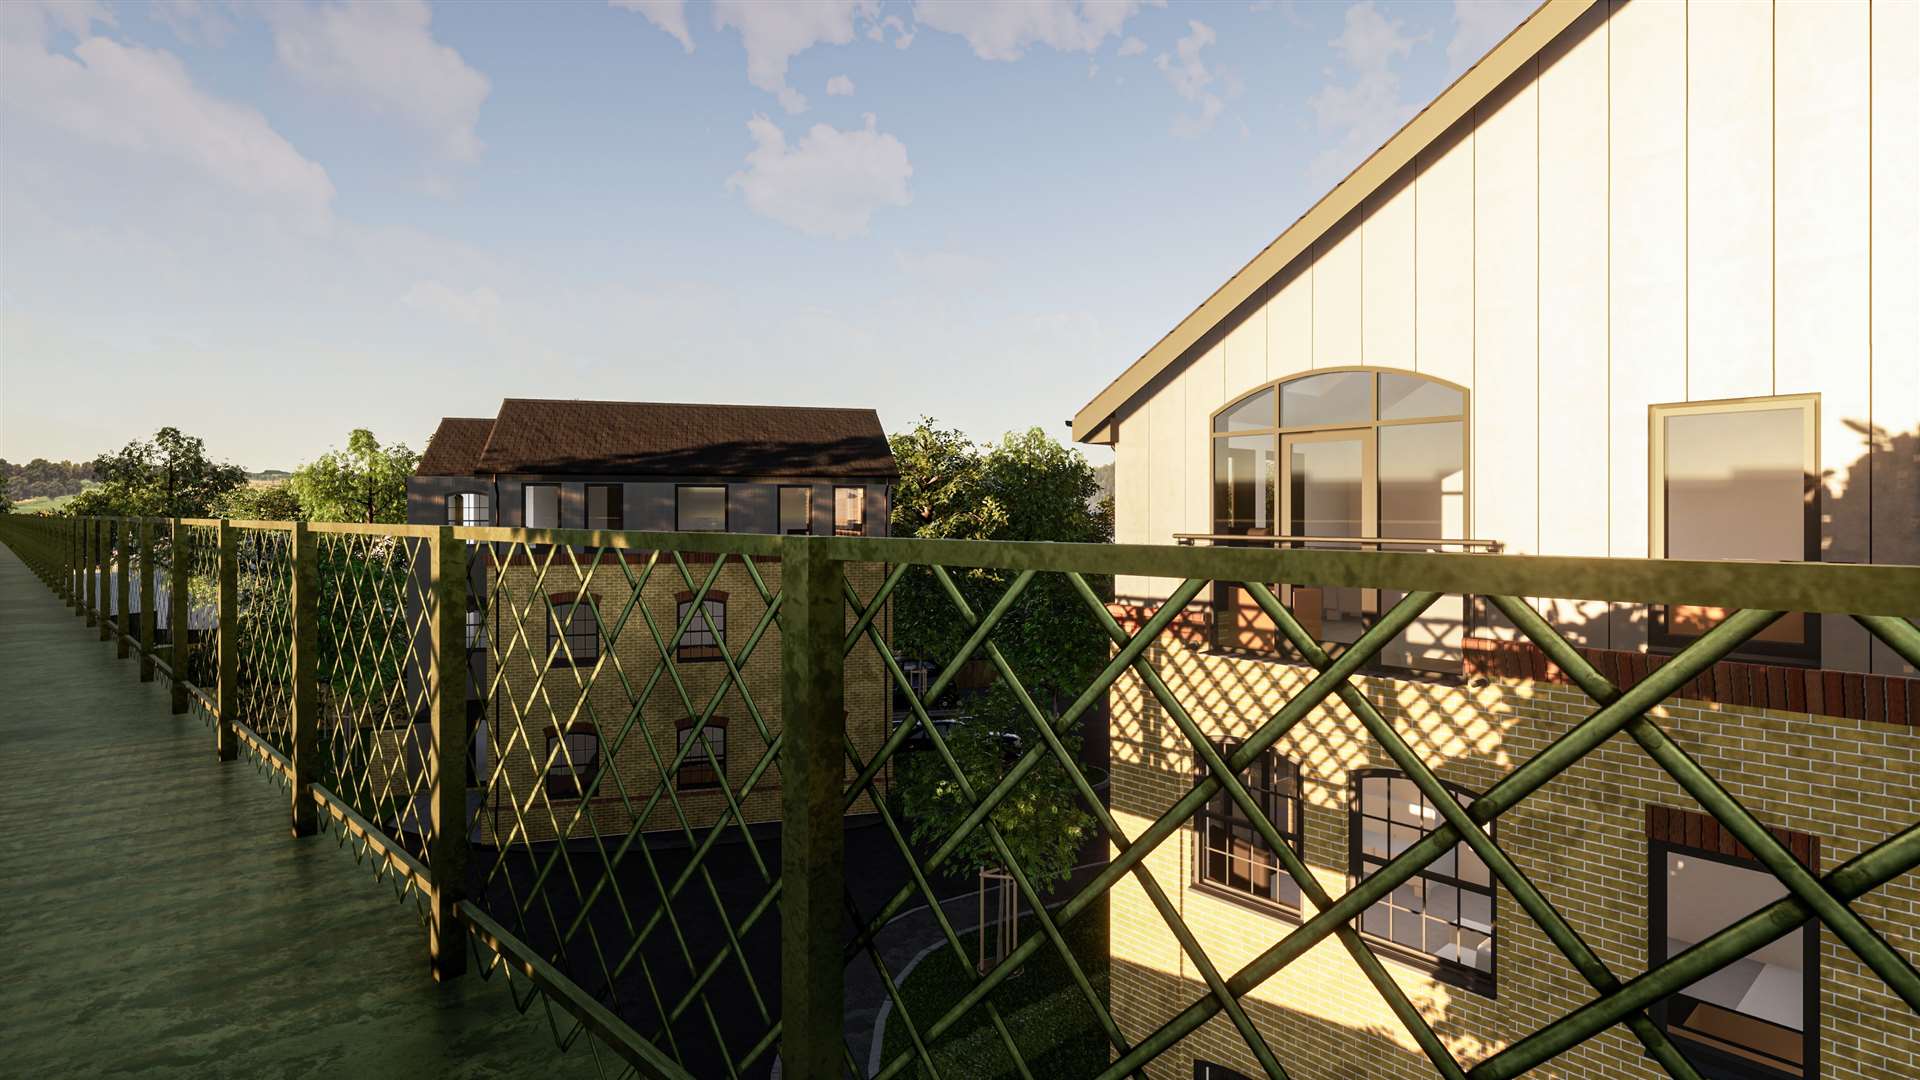 How the Faversham development is planned to look